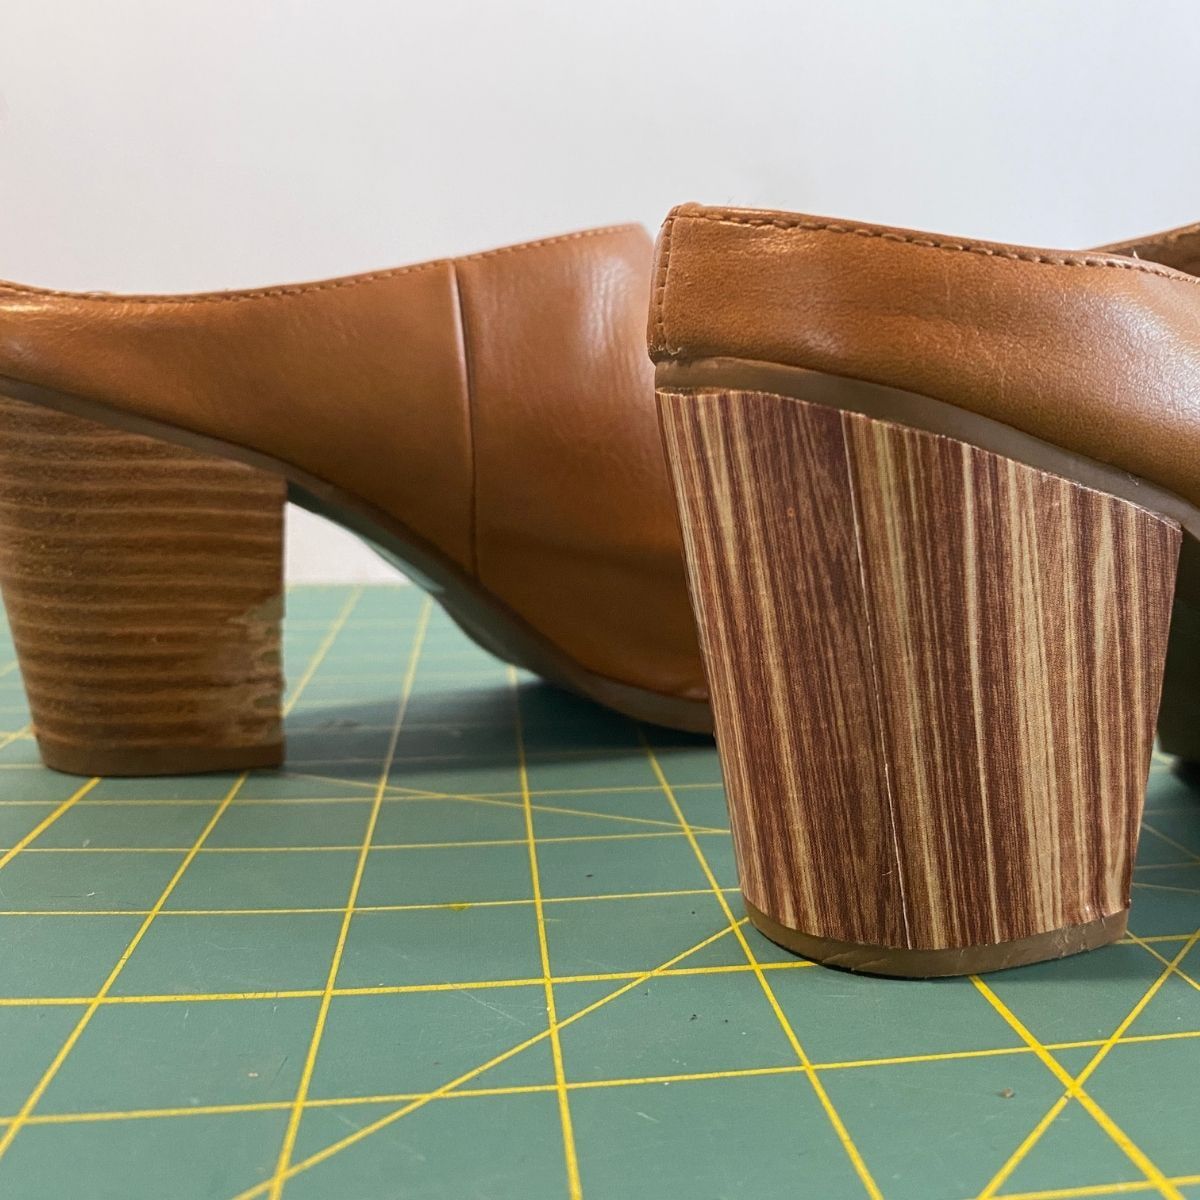 Damaged shoes, with one heel repaired with wood tape